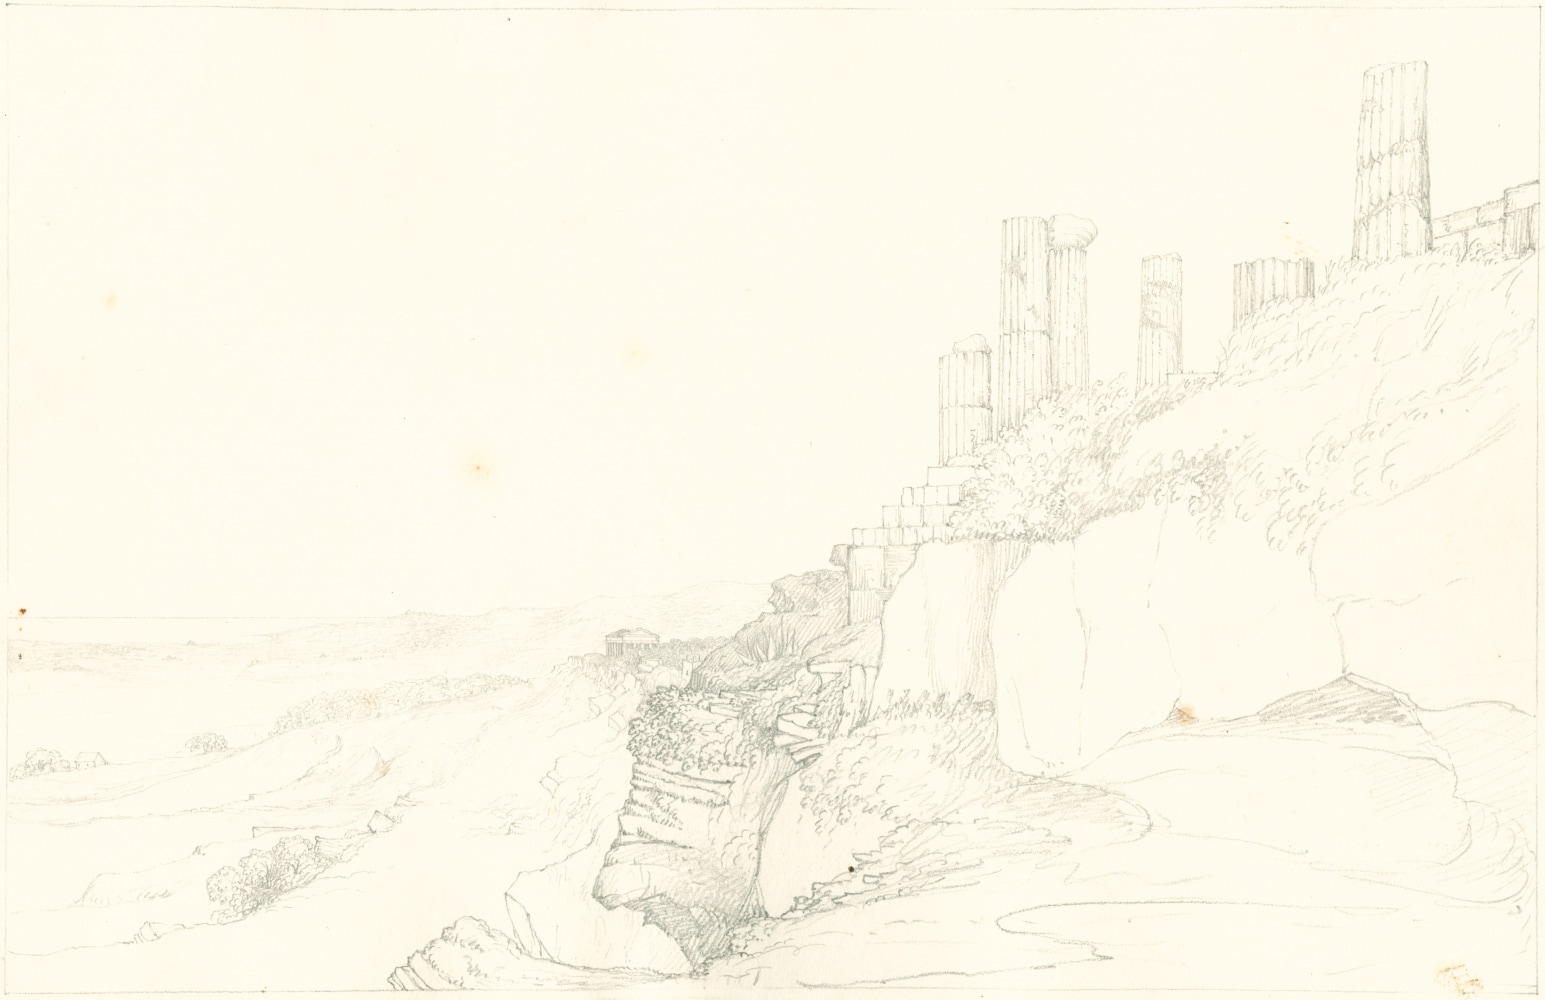 Sir John Frederick William Herschel (English, 1792-1872) &quot;No 391 View from below the Temple of Juno, Girgenti Sicily. Temple of Concord in the distance”, 27 June 1824 Camera lucida drawing, pencil on paper 20.0 x 31.0 cm on 25.1 x 38.4 cm paper